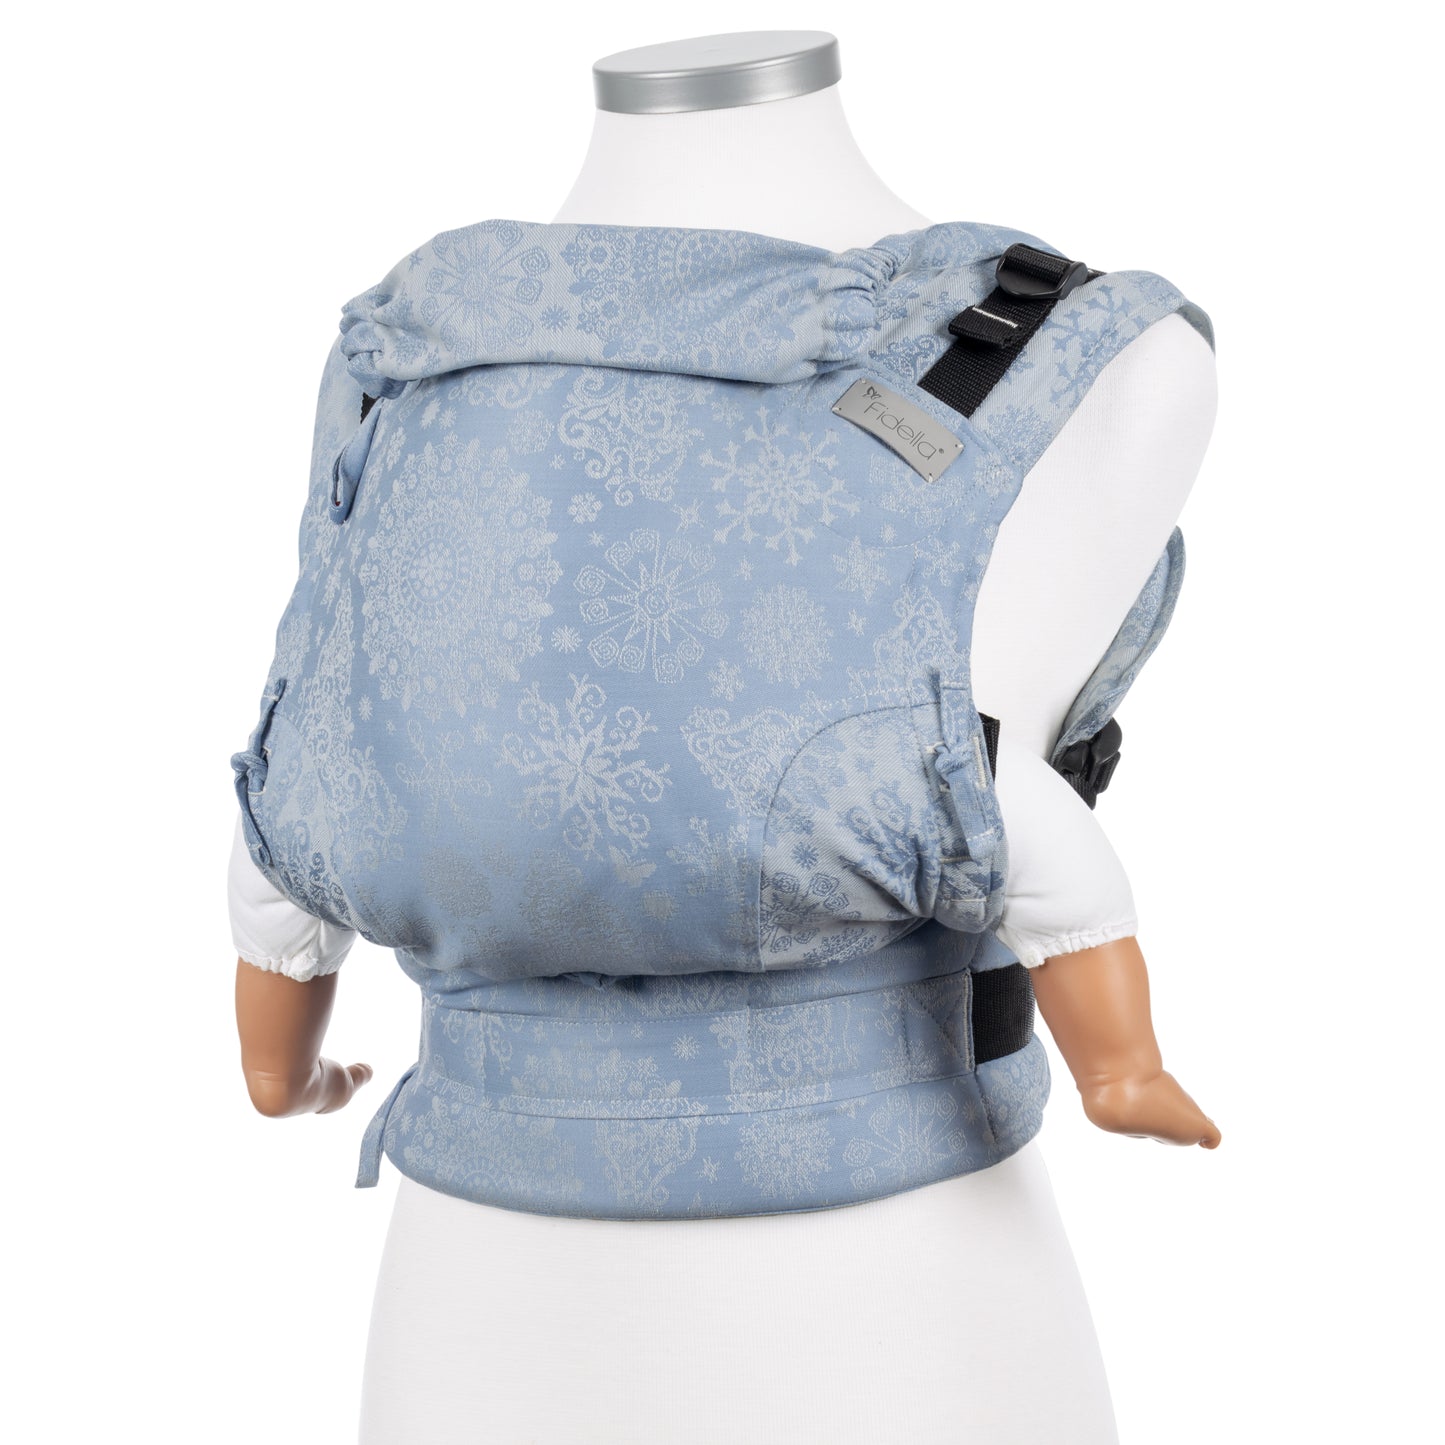 Fusion - Fullbuckle Baby Carrier - Iced Butterfly - light blue